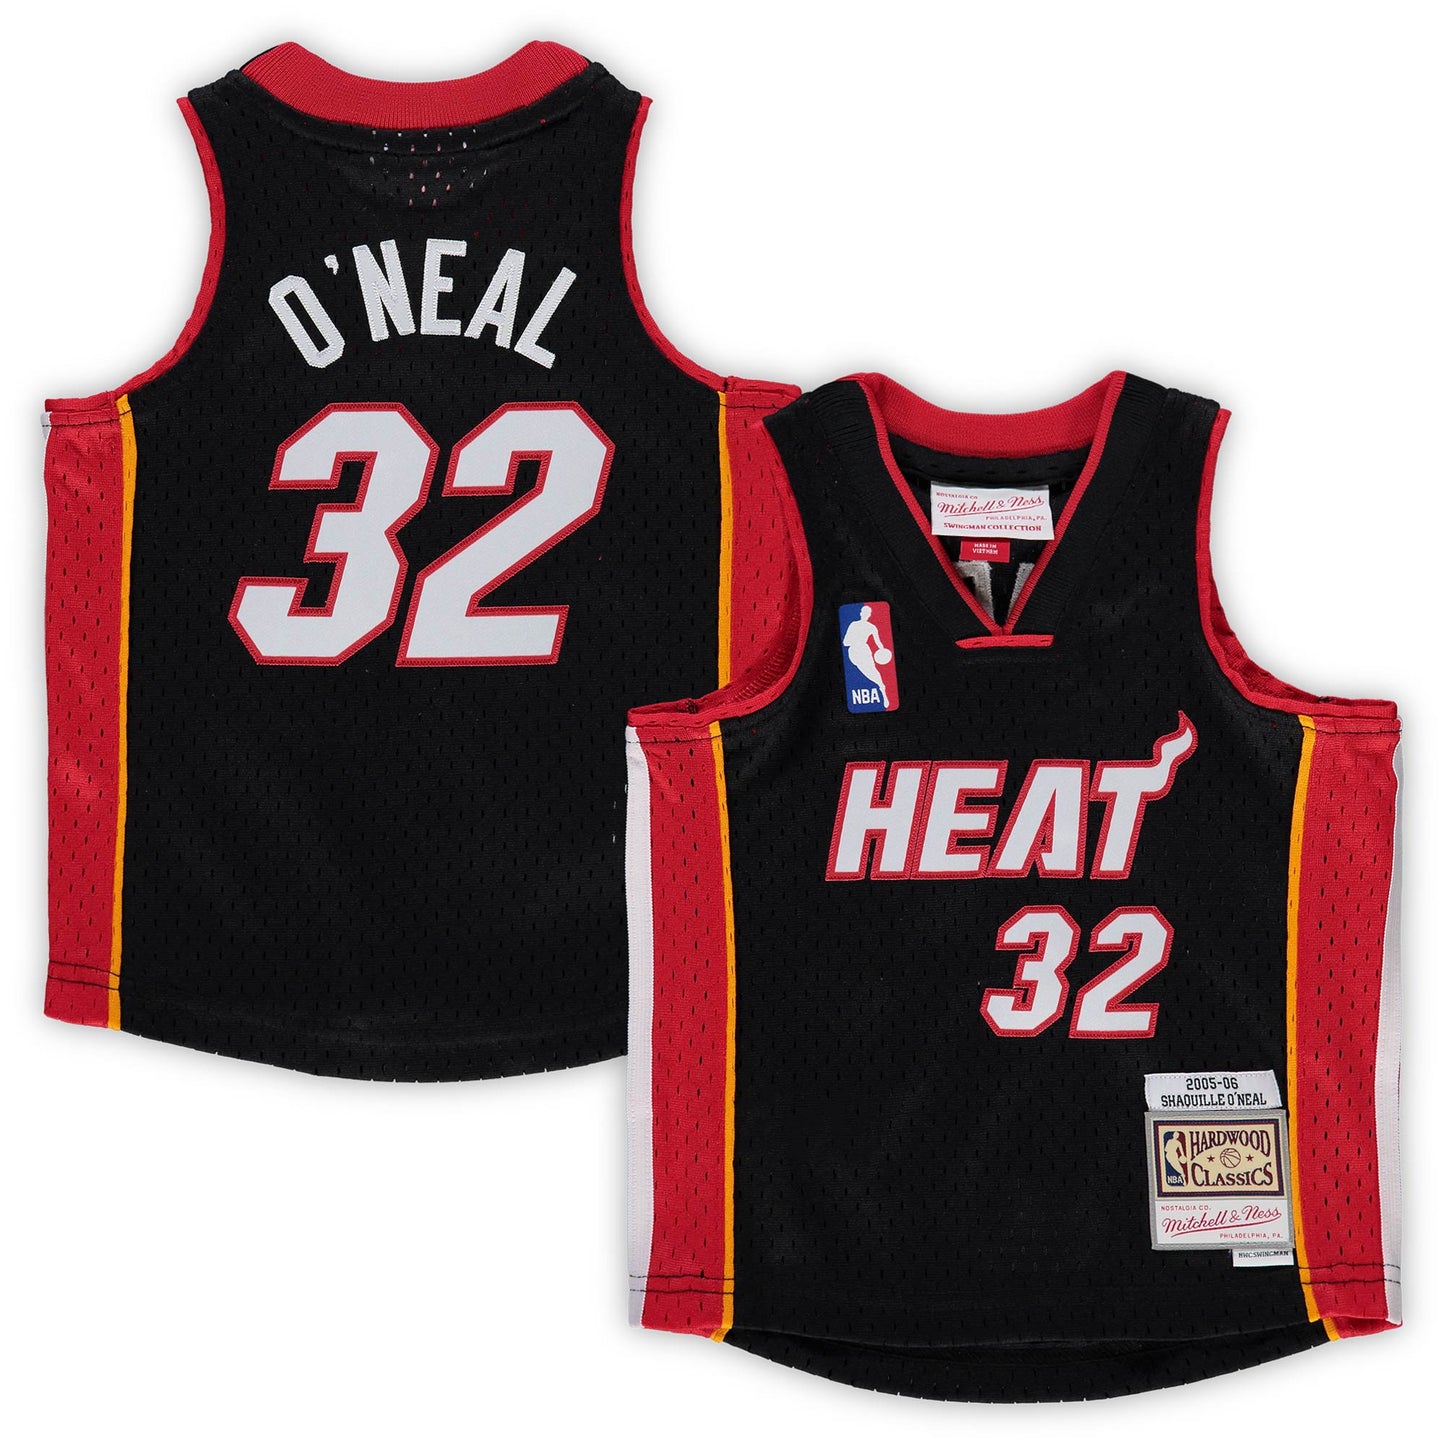 Shaquille O'Neal Miami Heat Mitchell & Ness Infant 2005/06 Hardwood Classics Retired Player Jersey - Black